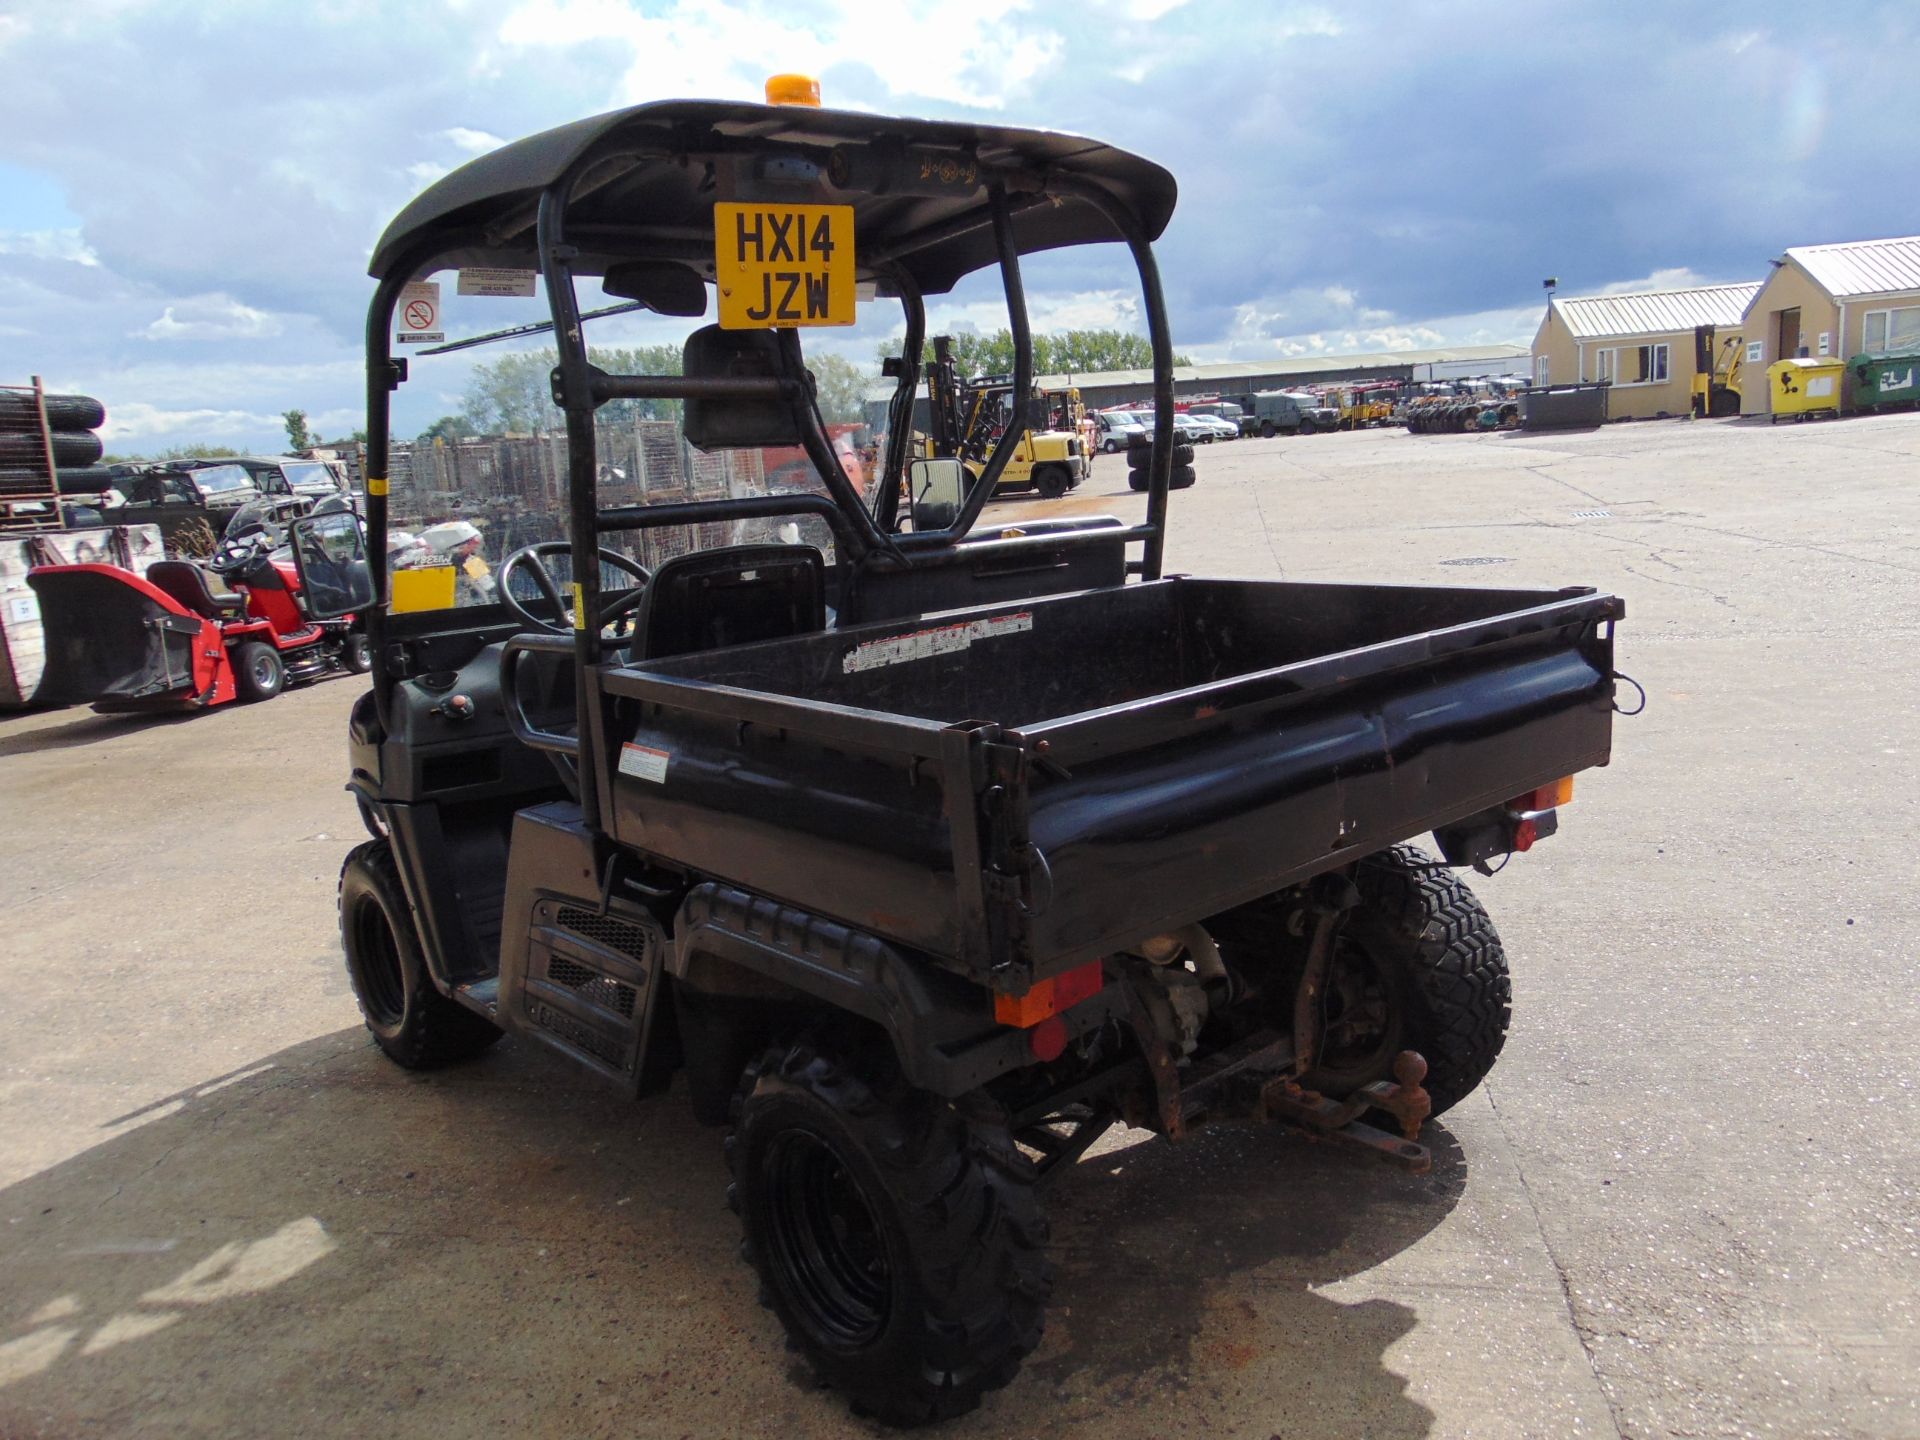 2014 Cushman XD1600 4x4 Diesel Utility Vehicle Showing 1198 hrs - Image 6 of 18